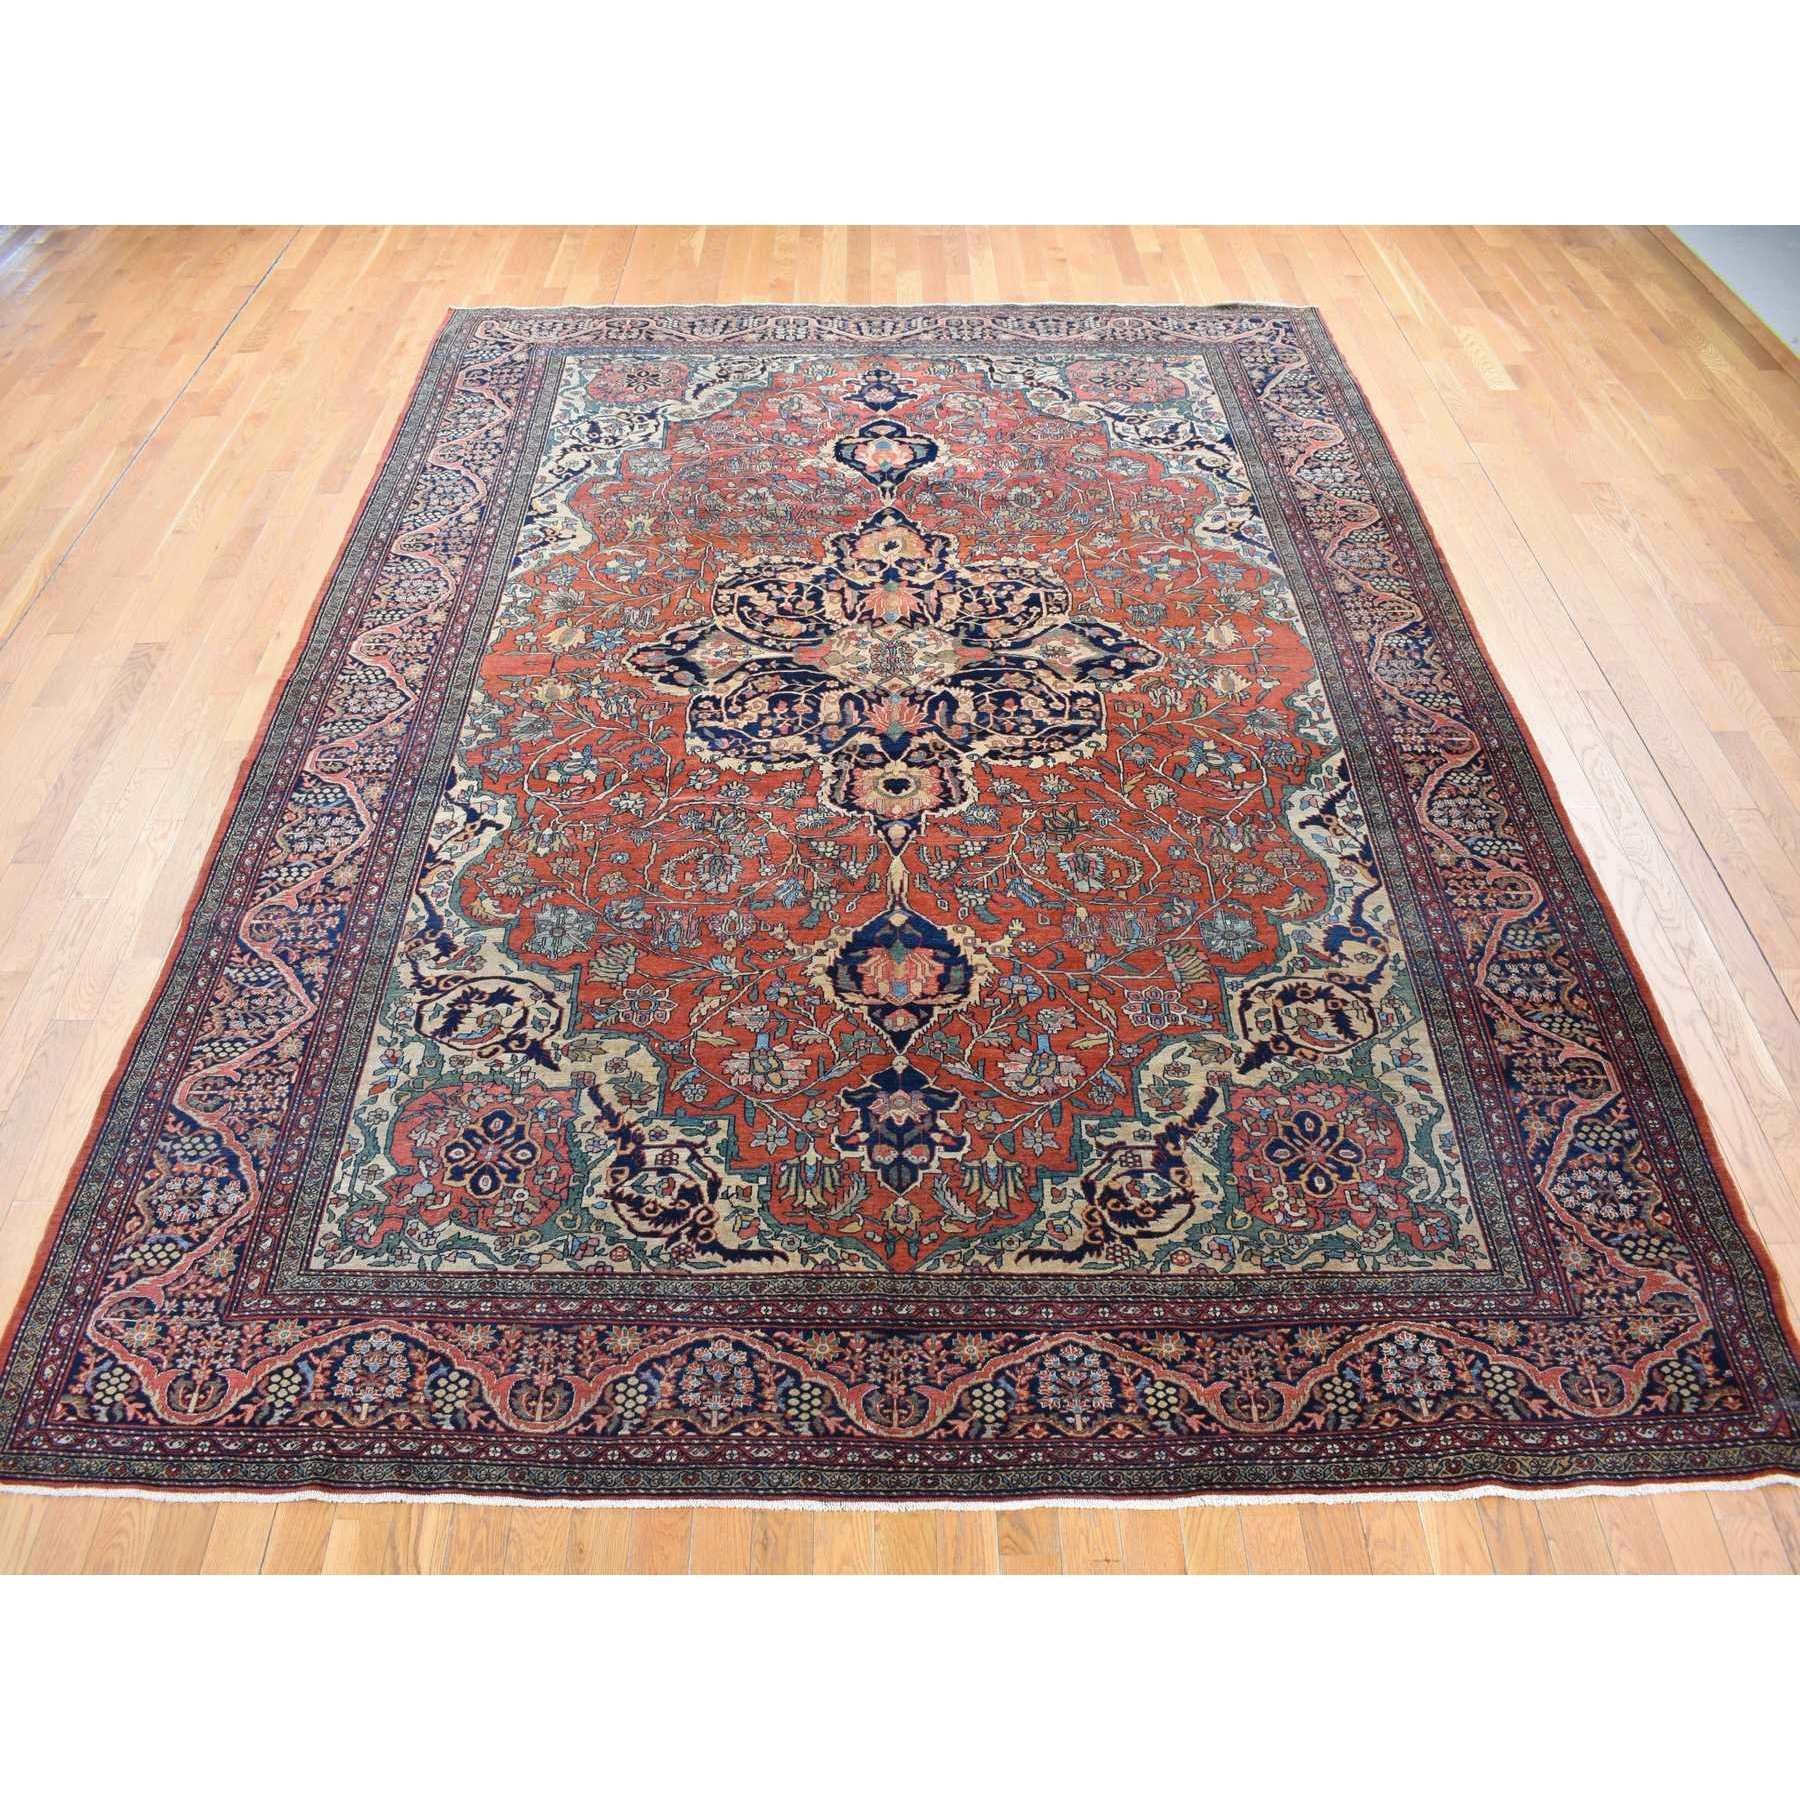 Medieval Barn Red Antique Persian Feraghan Sarouk Evenly Worn Hand Knotted Wool Clean Rug For Sale